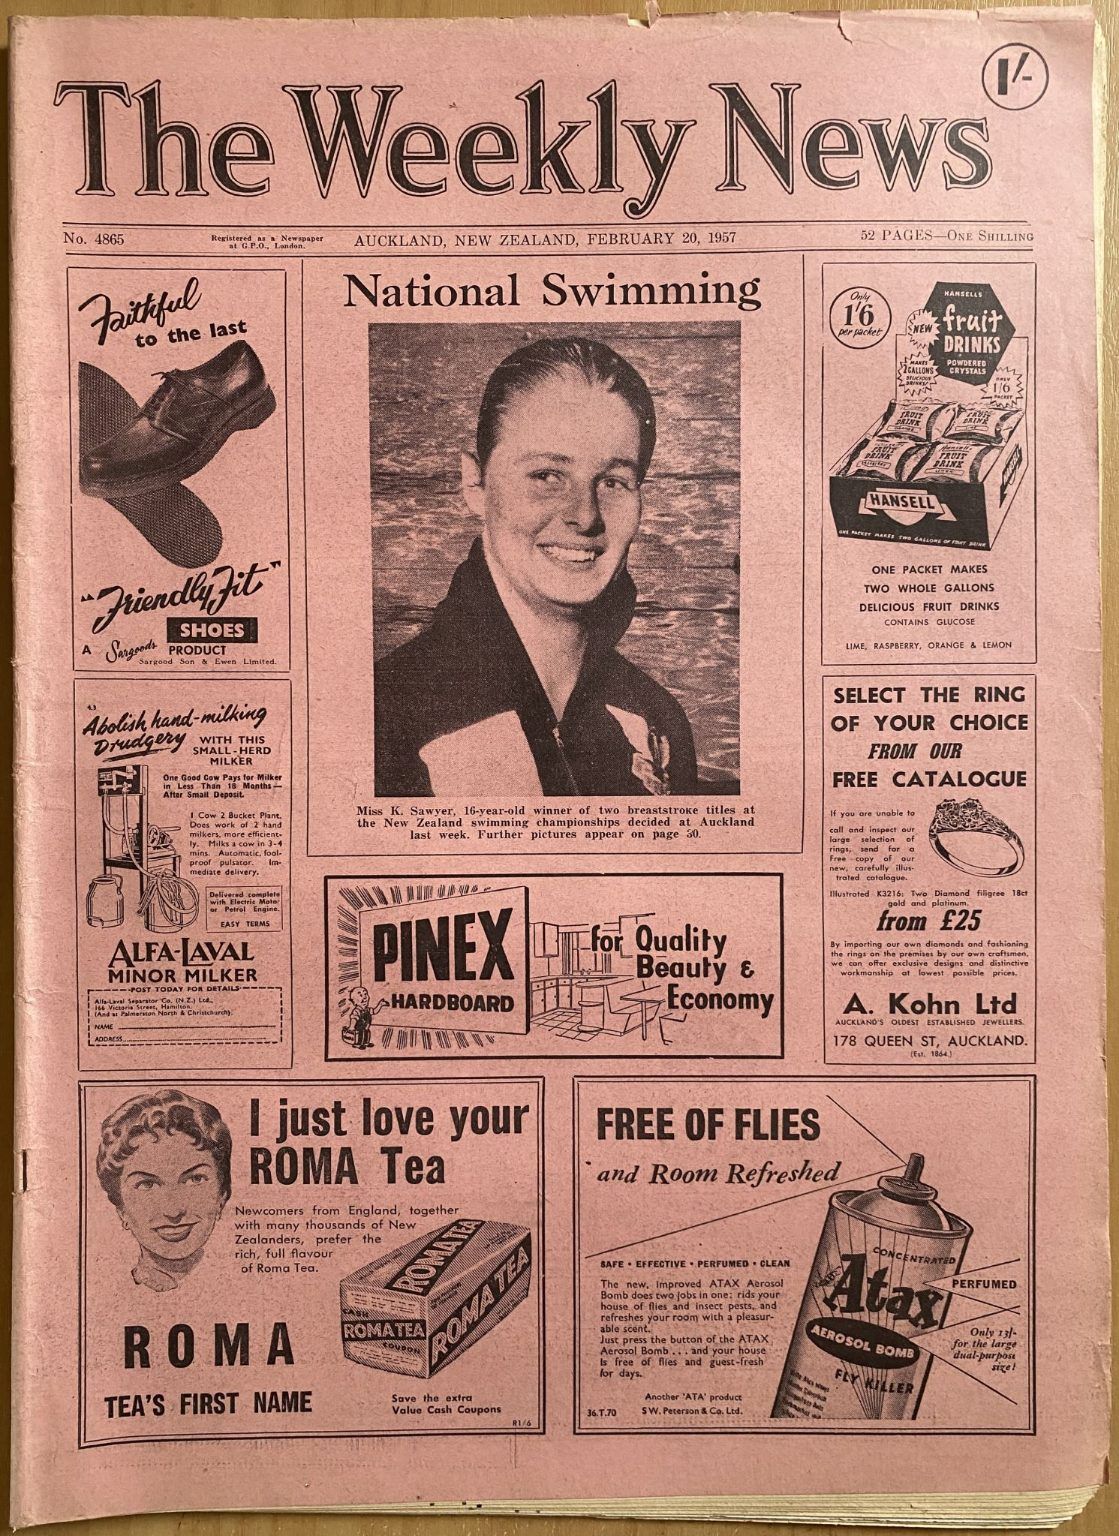 OLD NEWSPAPER: The Weekly News, No. 4865, 20 February 1957